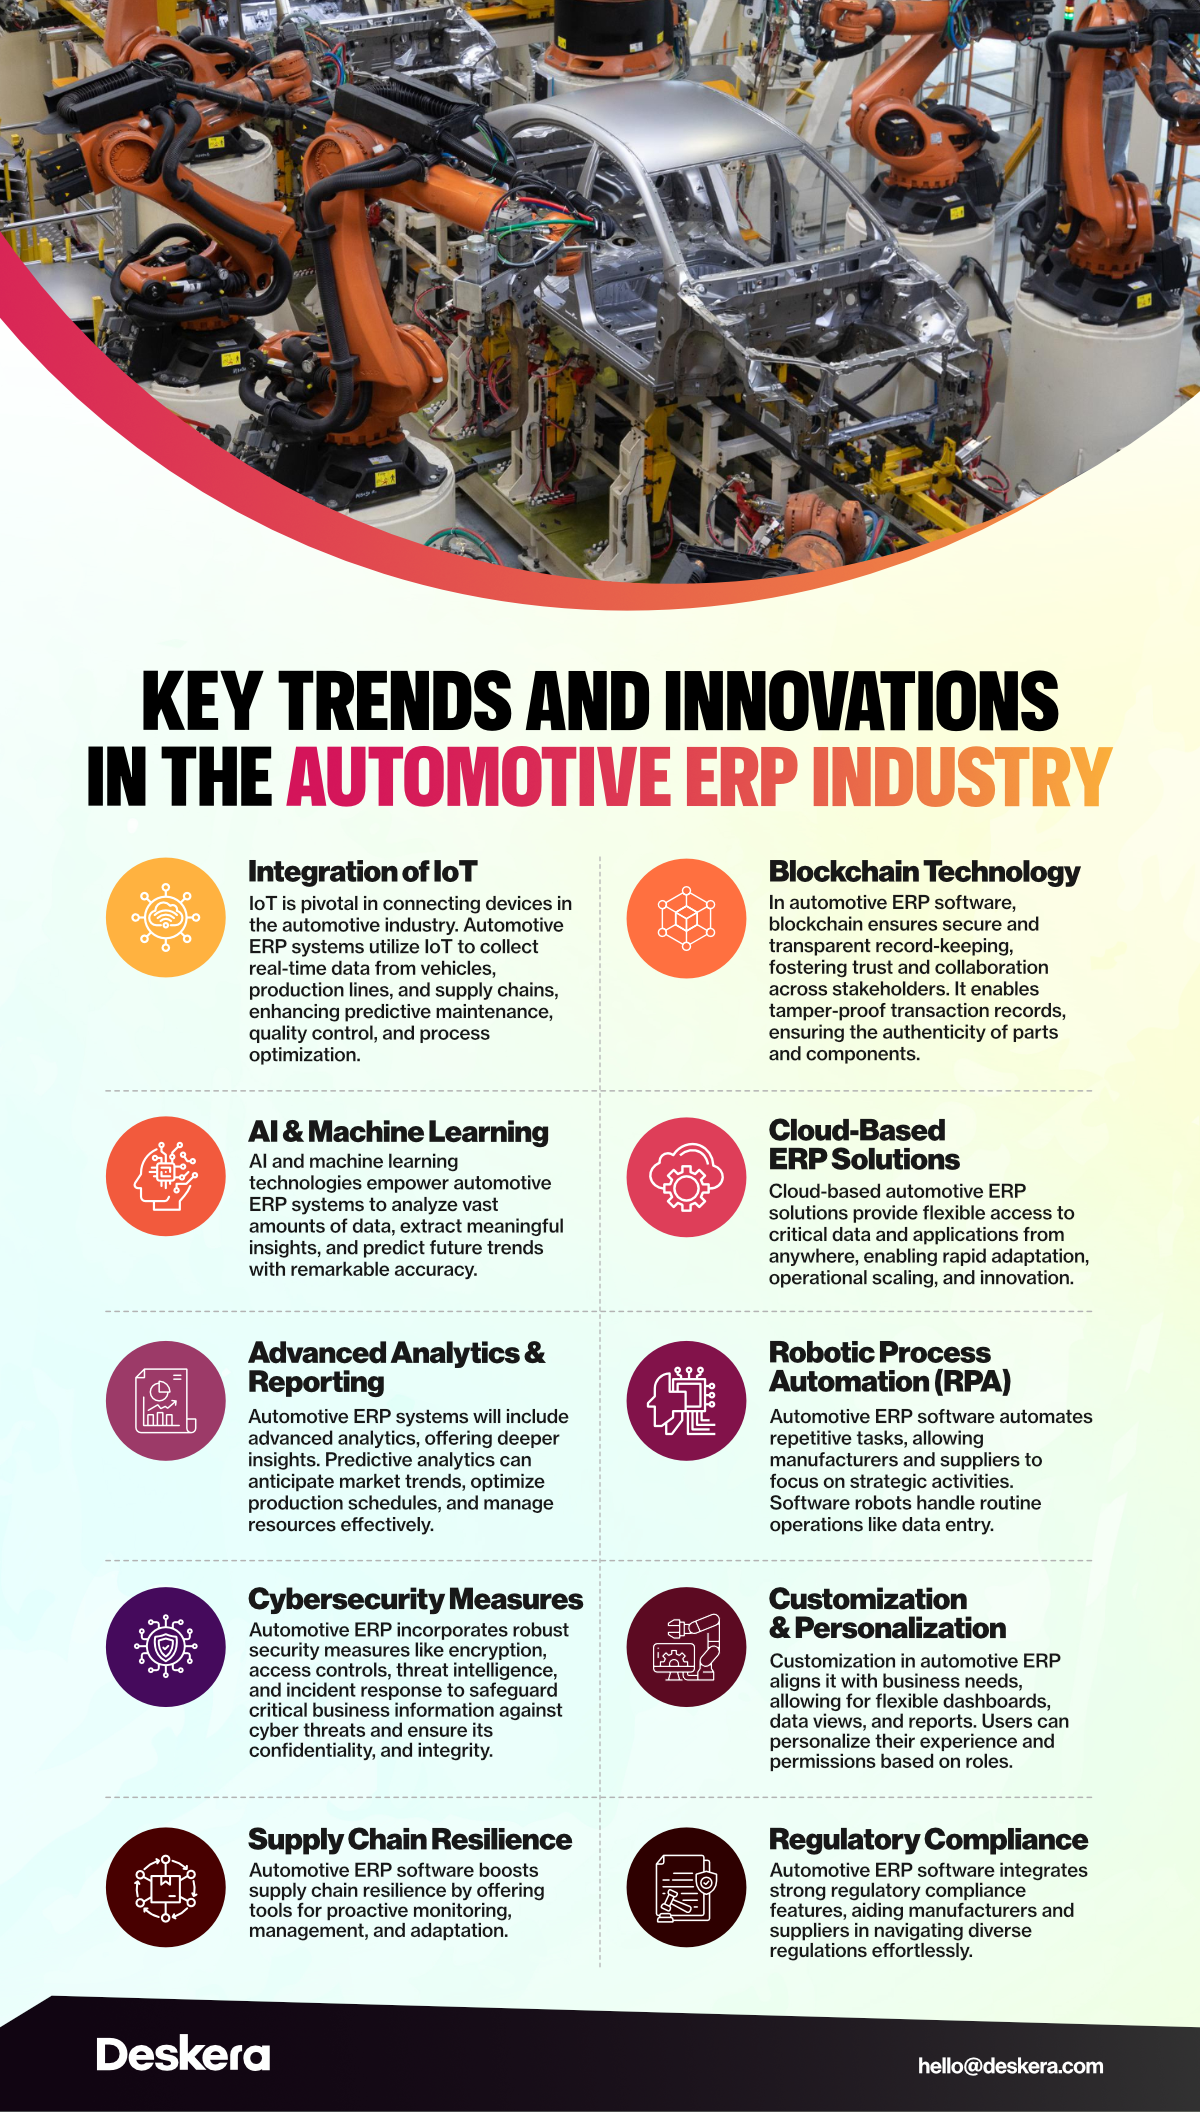 Key Trends and Innovations in the Automotive ERP Industry